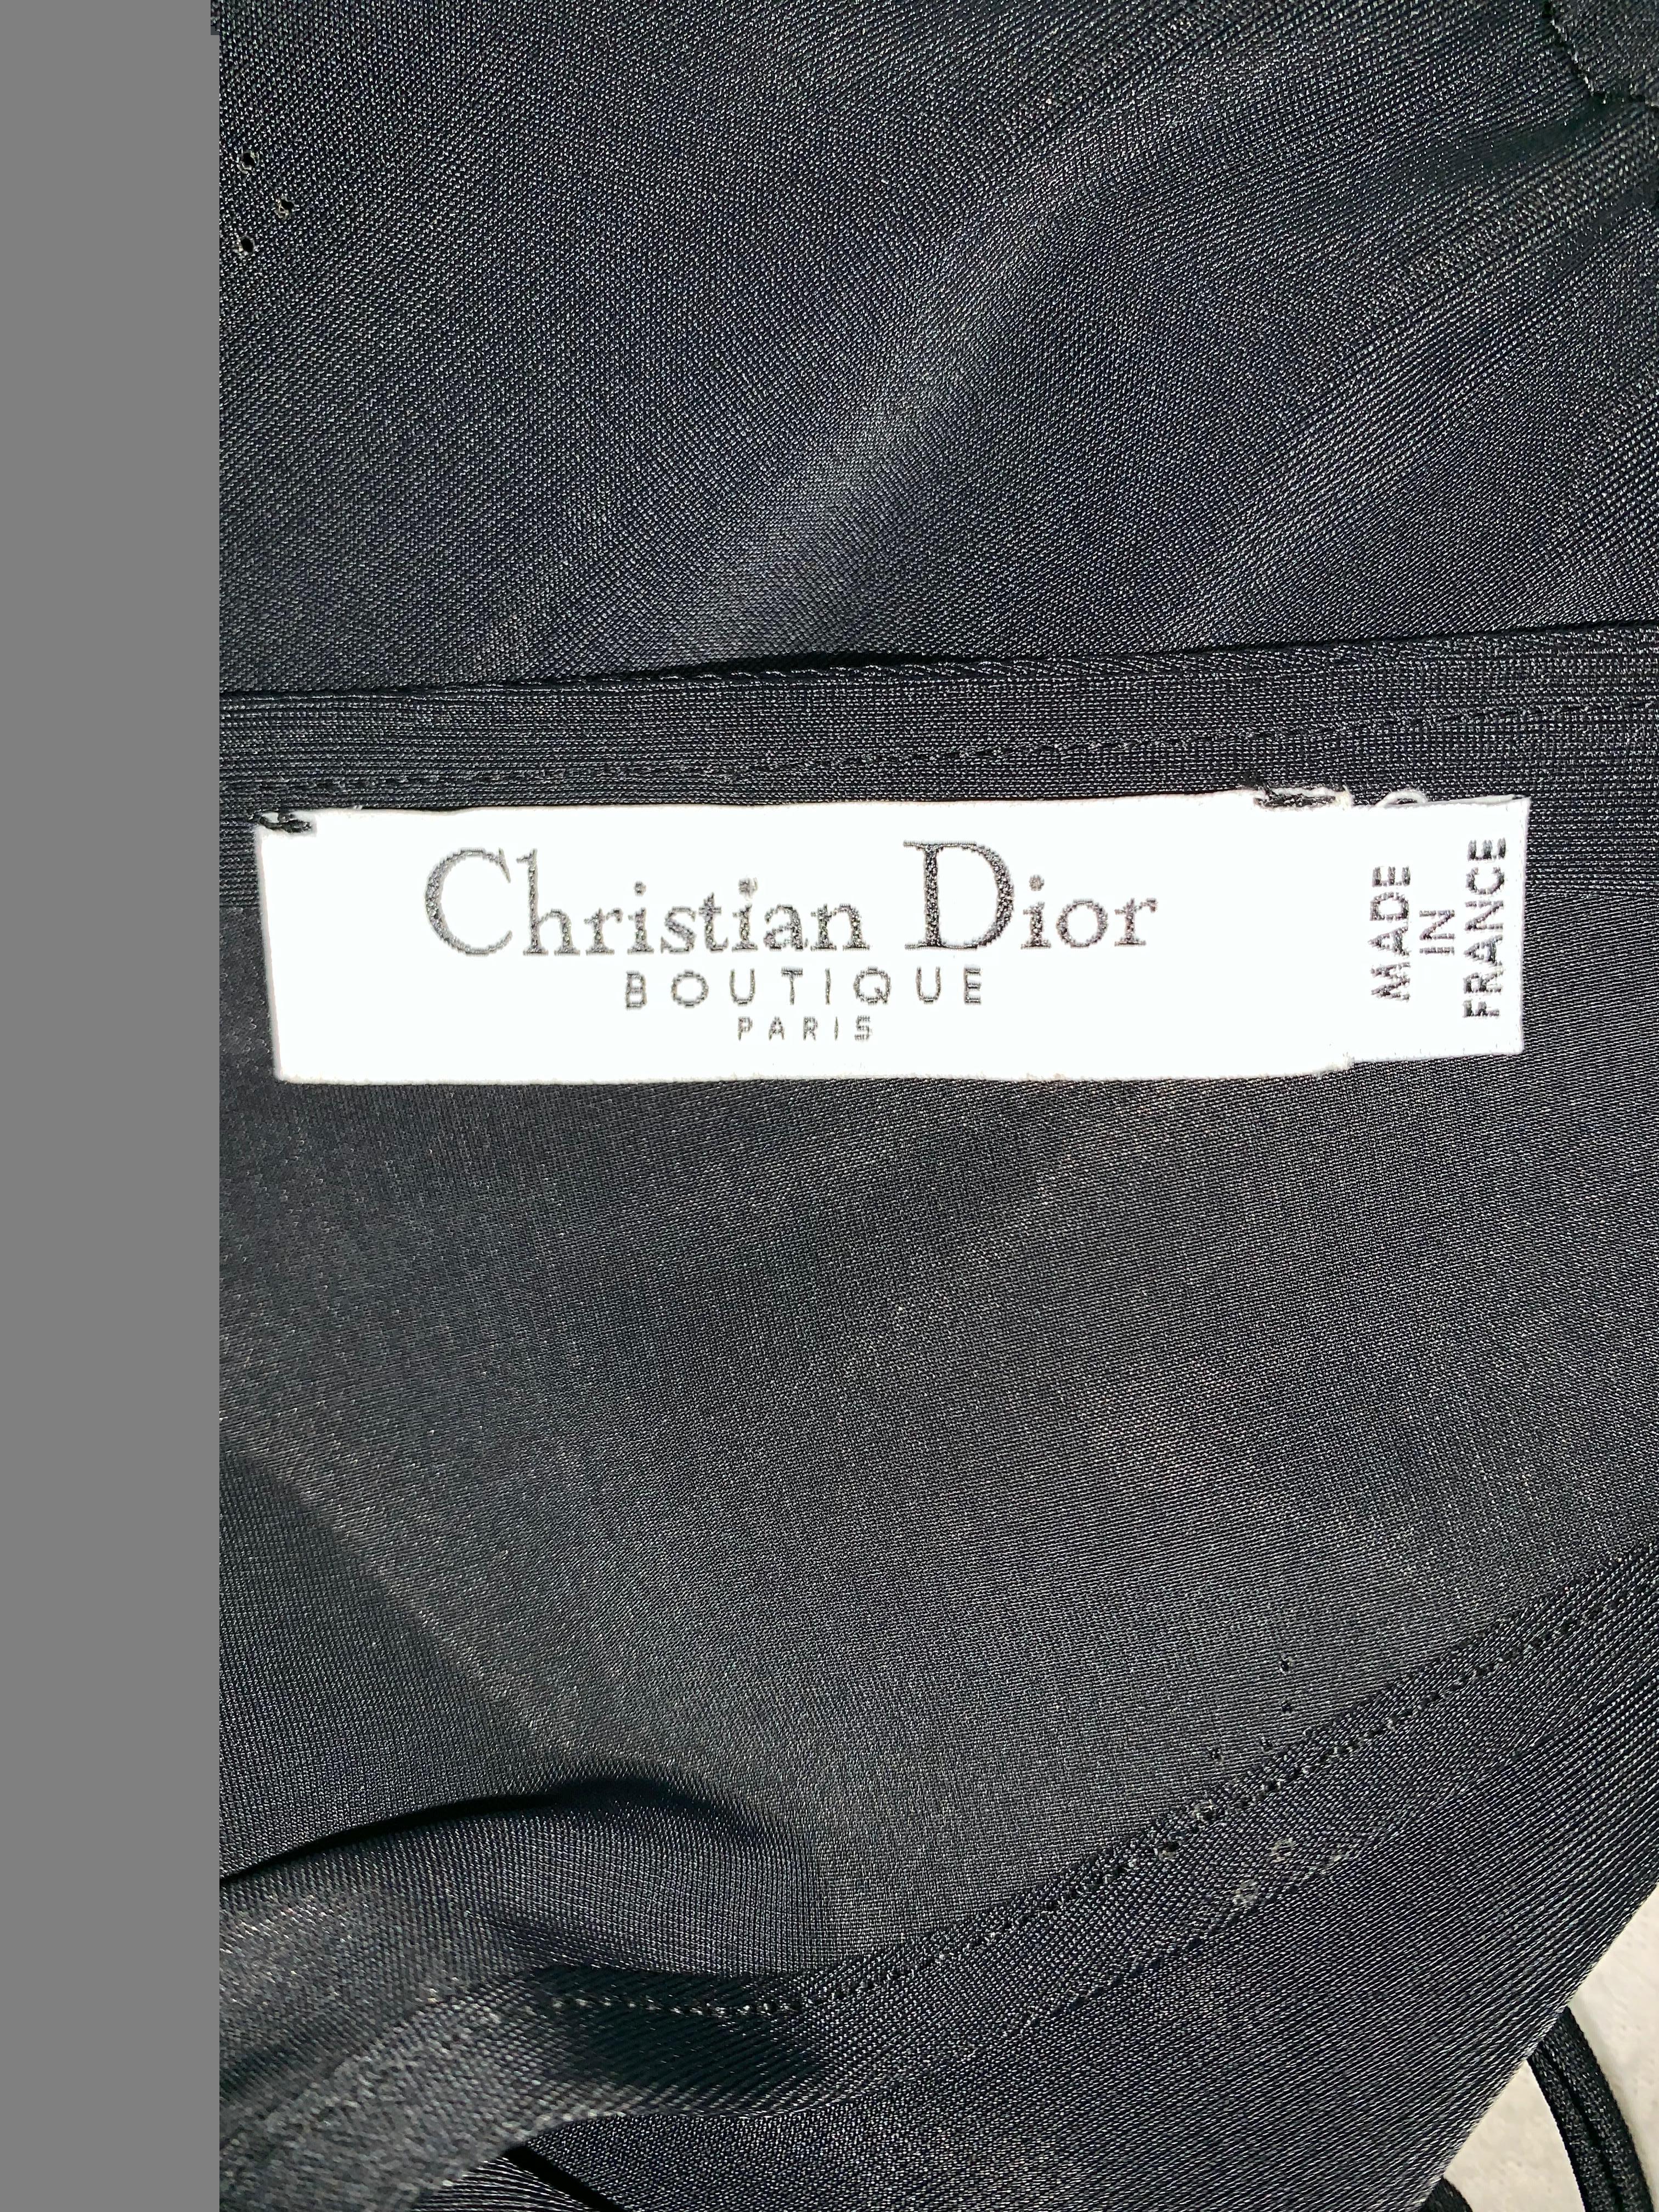 S/S 2000 Christian Dior Black Plunging High Slits Logo Monogram Mini Dress In Excellent Condition In Yukon, OK